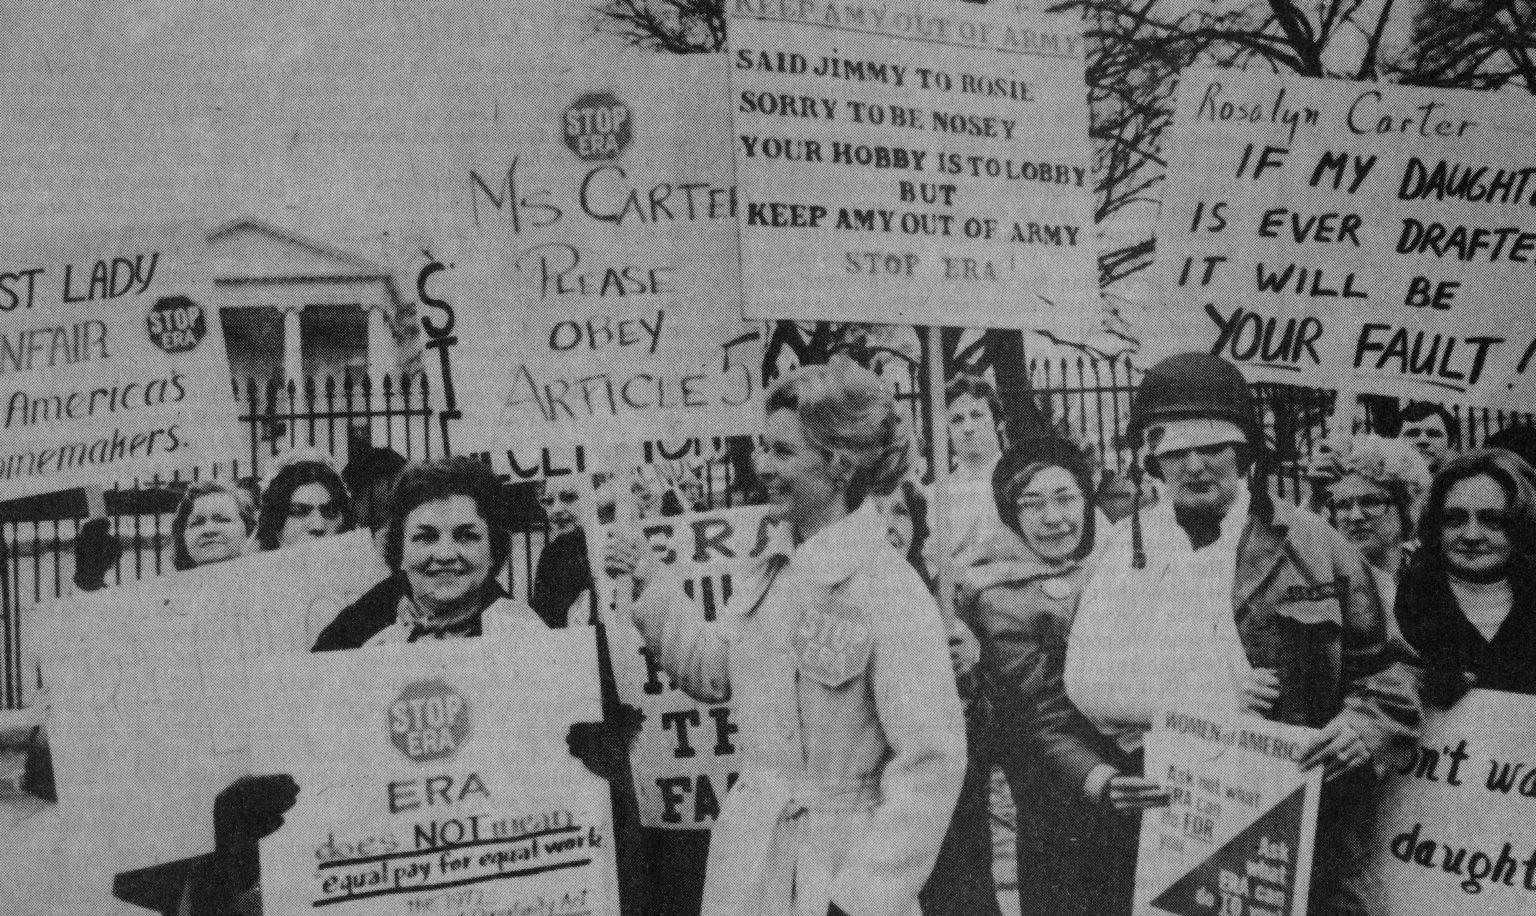 Phyllis Schlafly pickets Jimmy Carter's White House